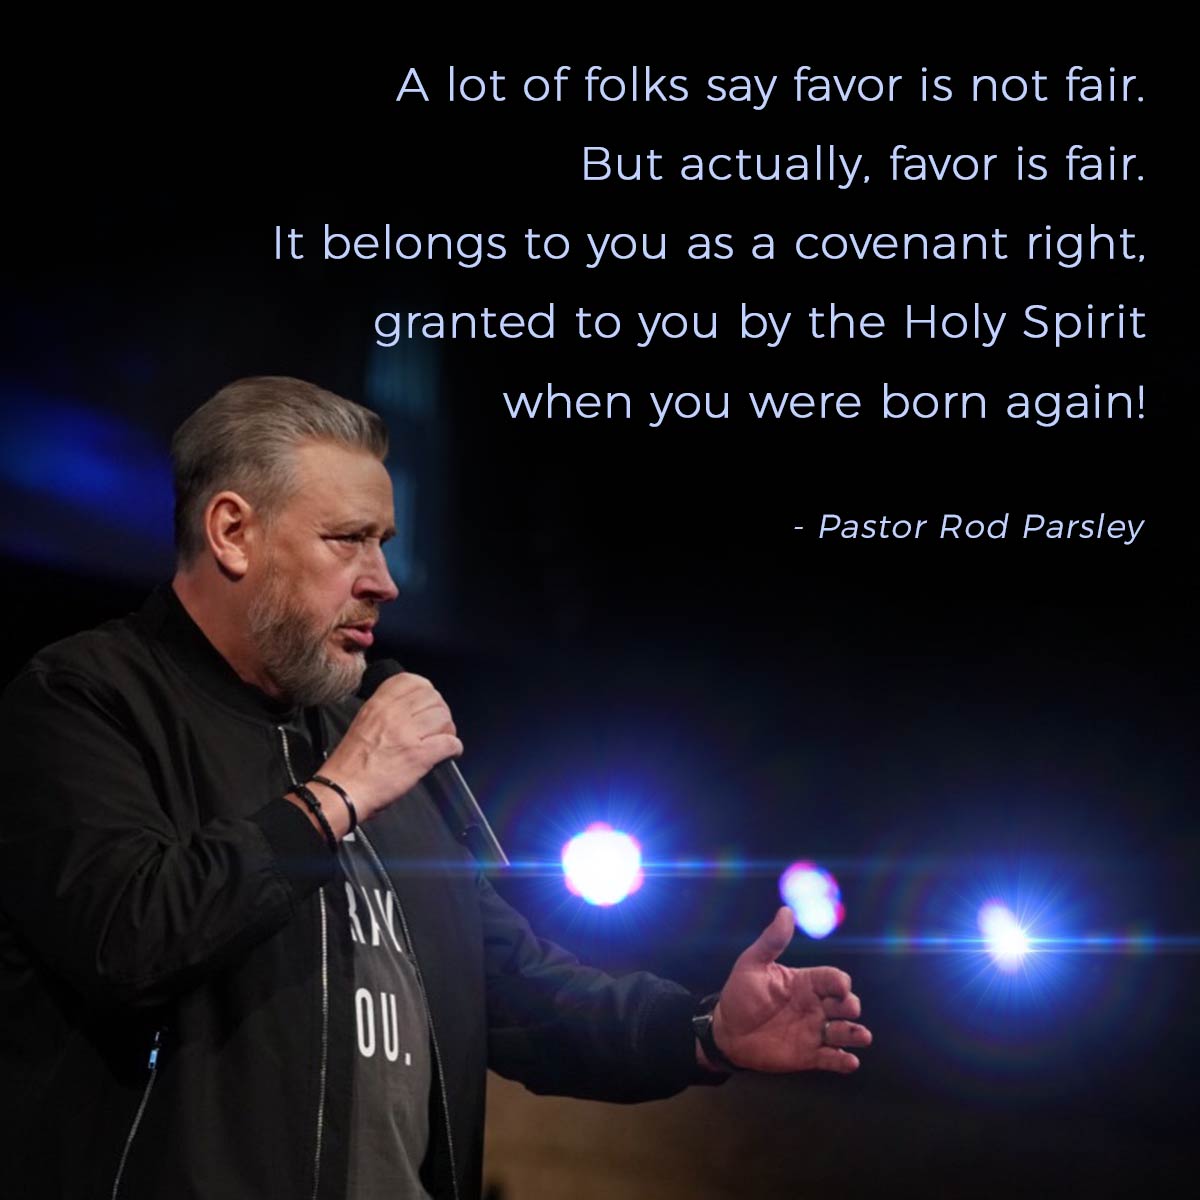 “A lot of folks say favor is not fair. But actually, favor is fair. It belongs to you as a covenant right, granted you by the Holy Spirit when you were born again!” – Pastor Rod Parsley